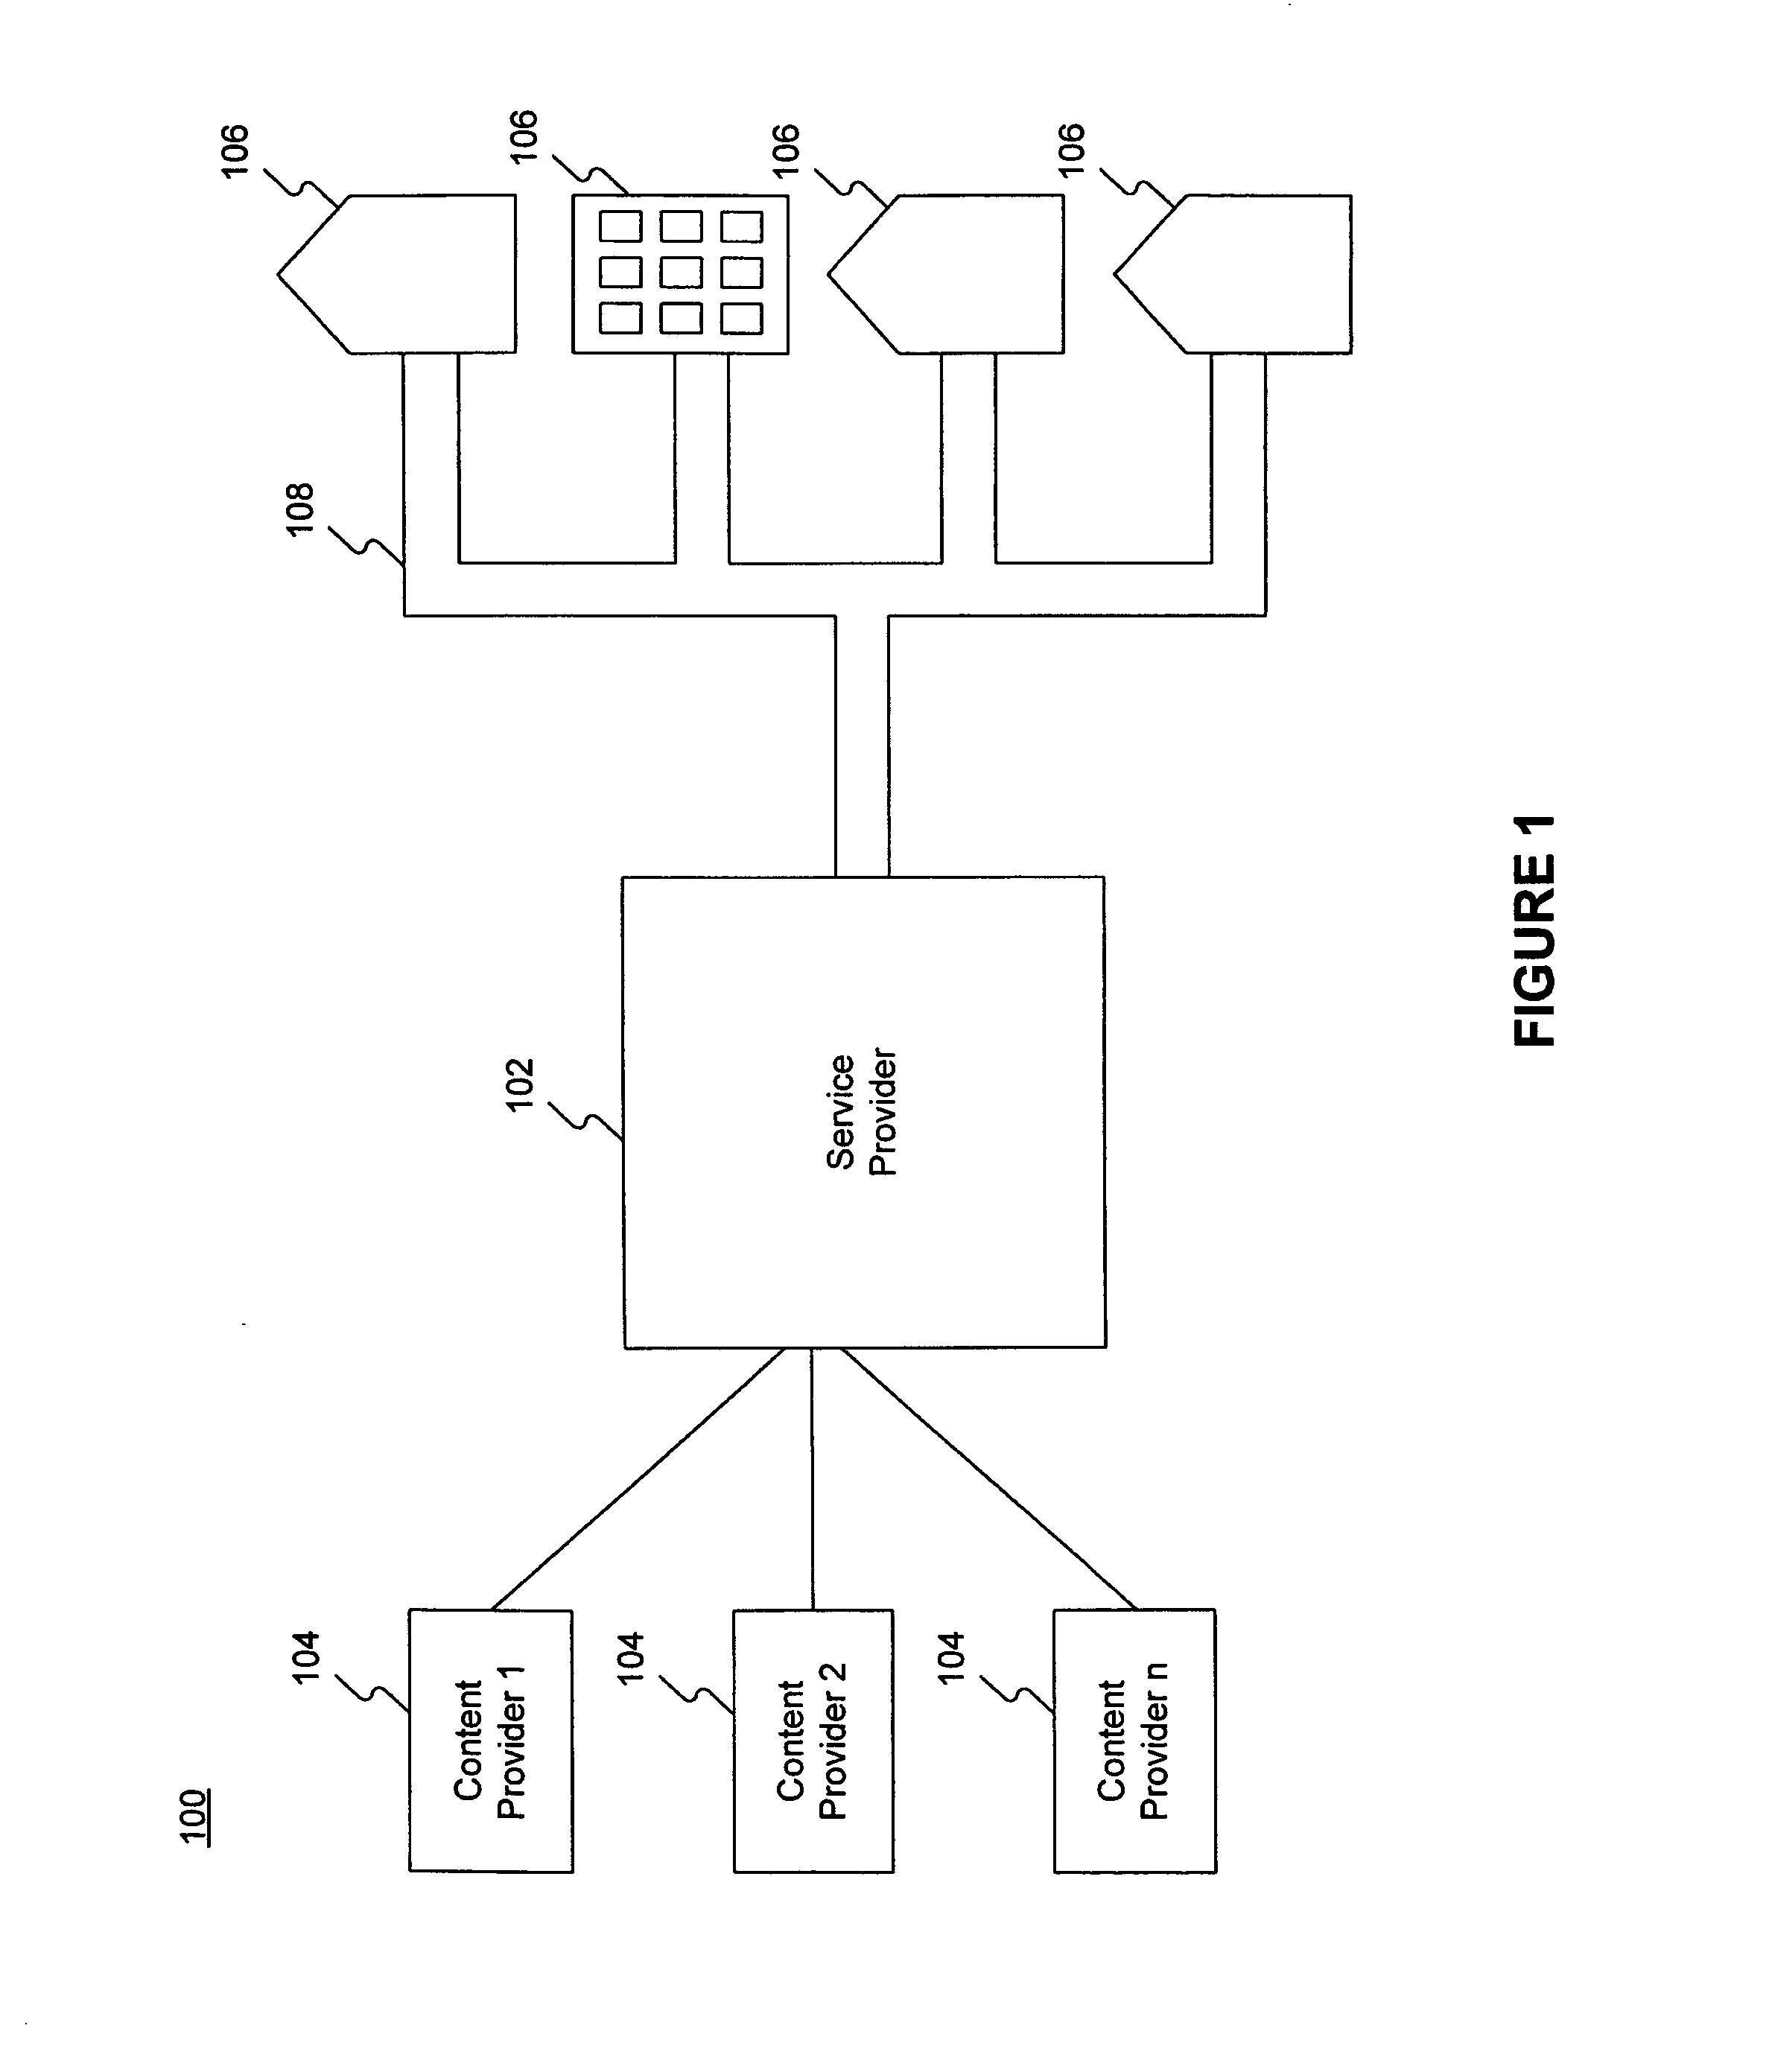 System and methods for voicing text in an interactive programming guide